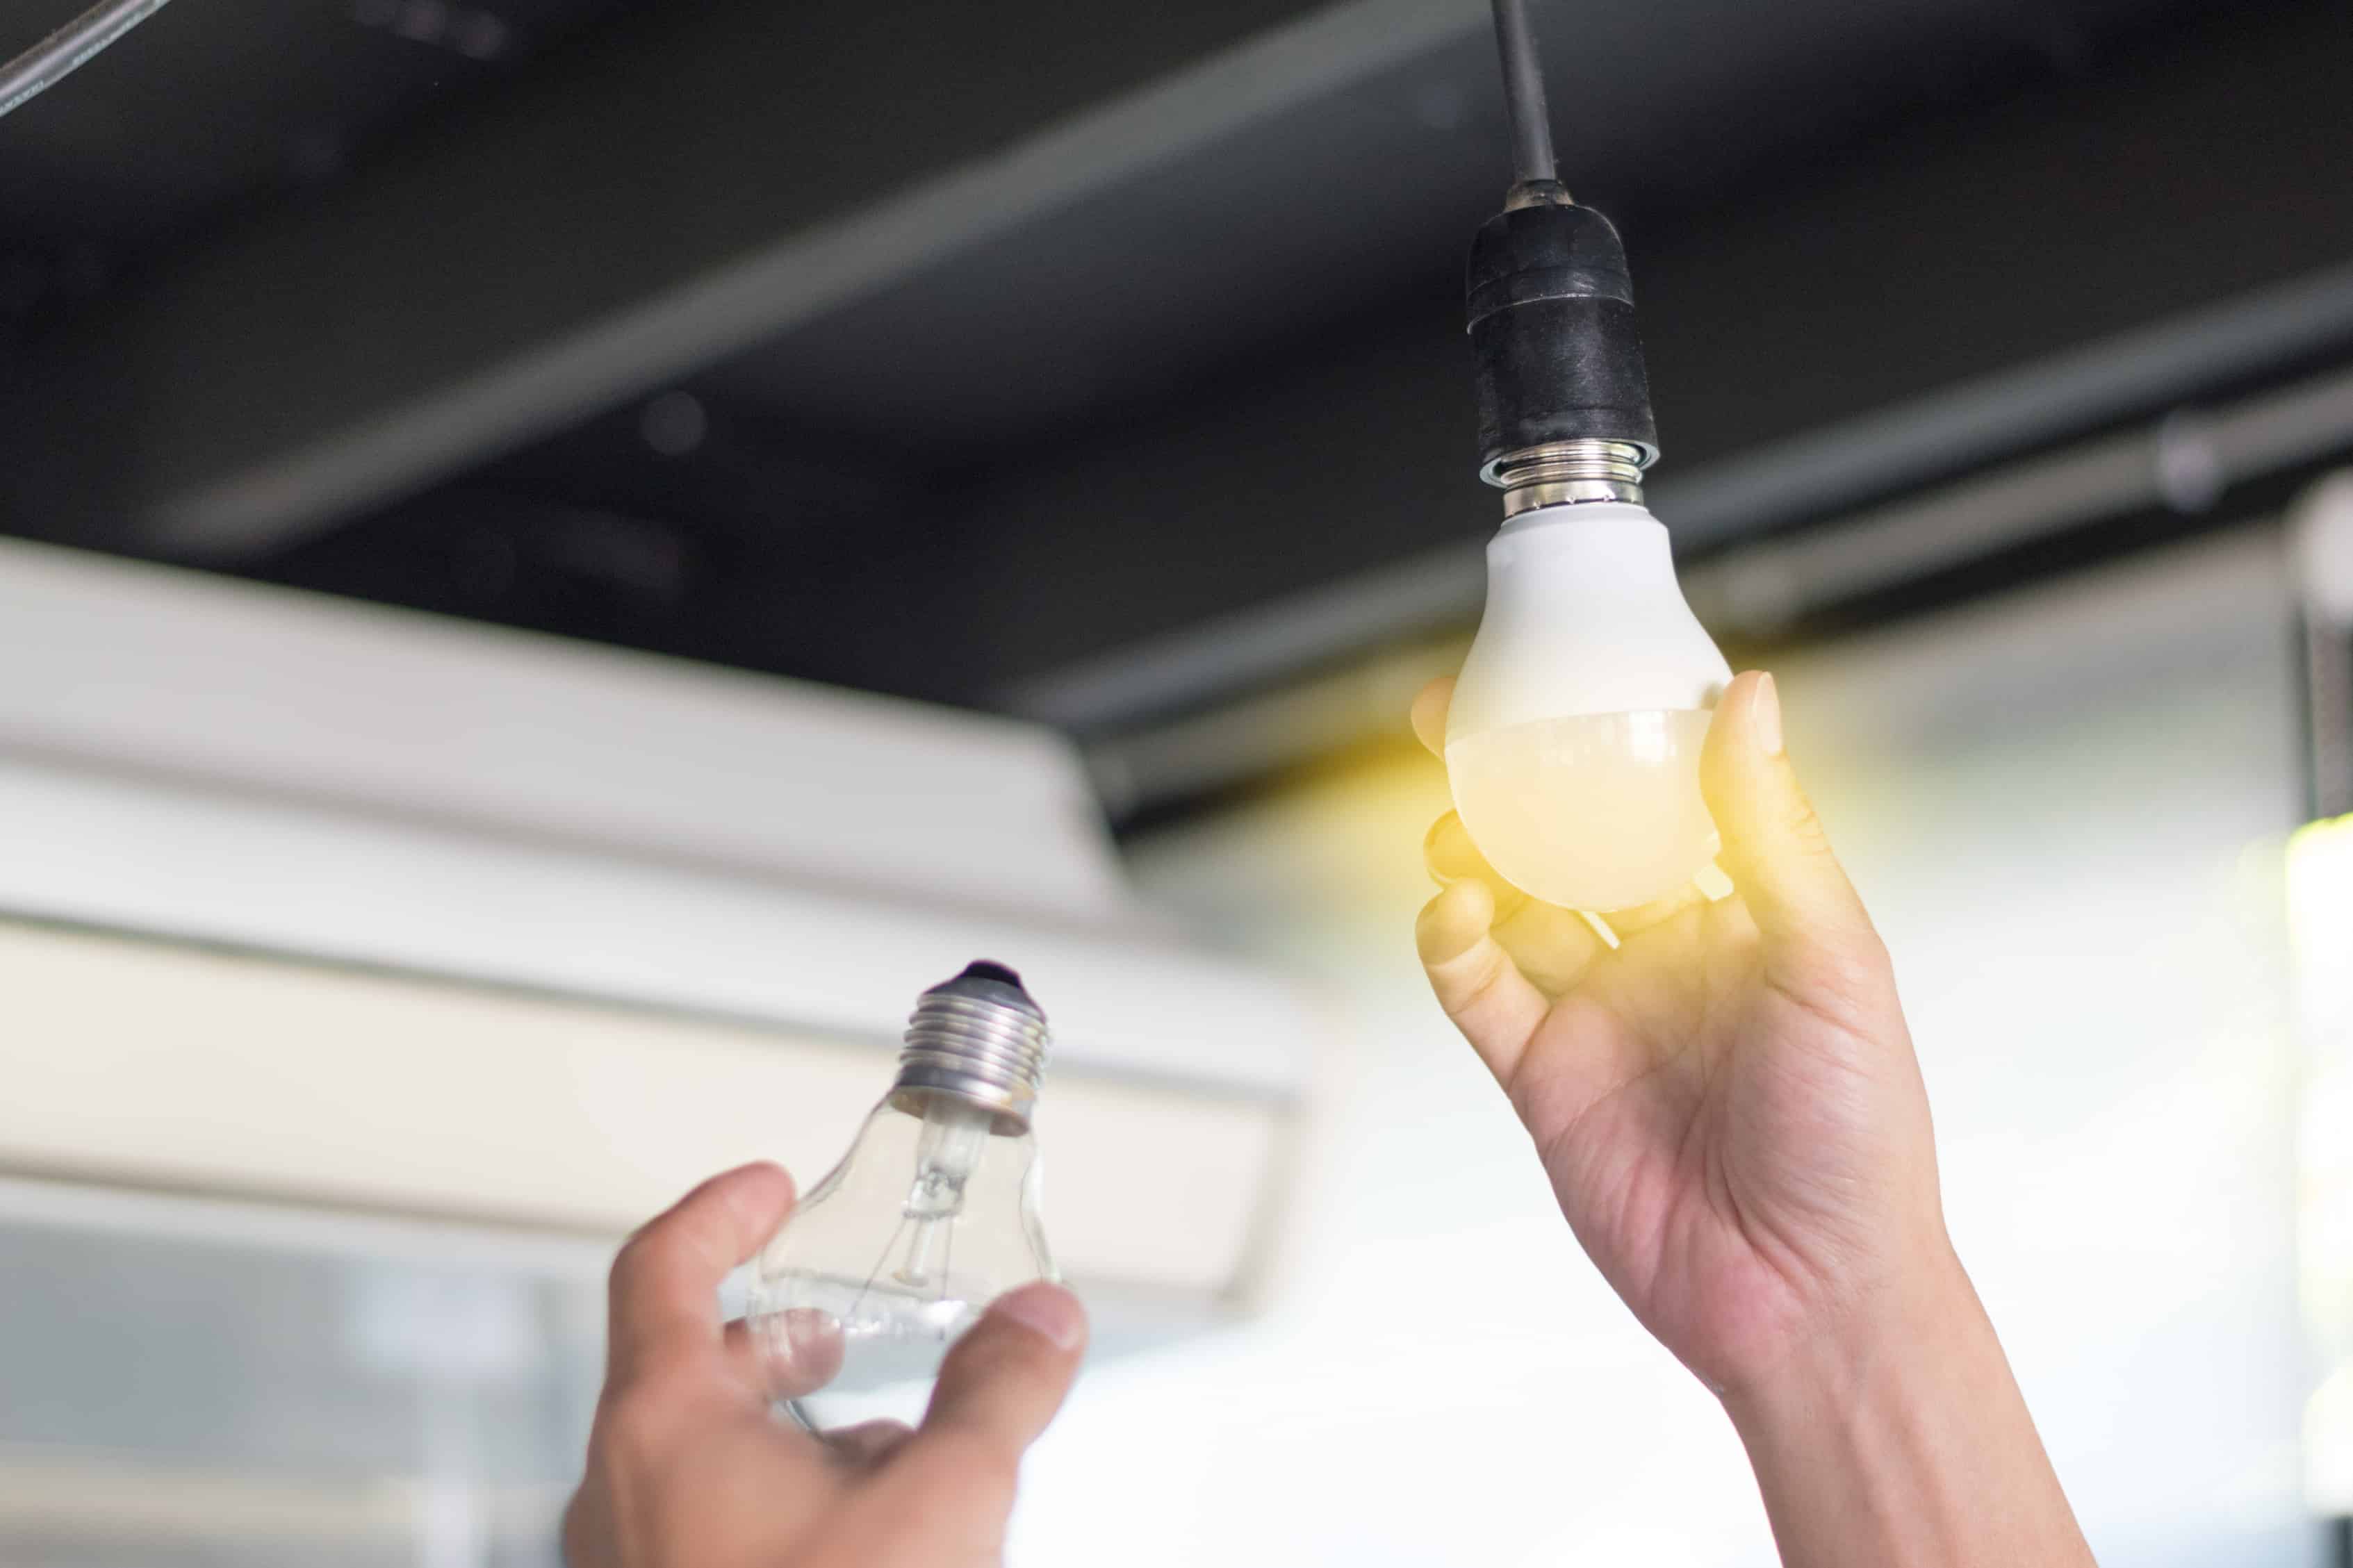 Power saving concept. Man changing compact-fluorescent (CFL) bulbs with new LED light bulb.